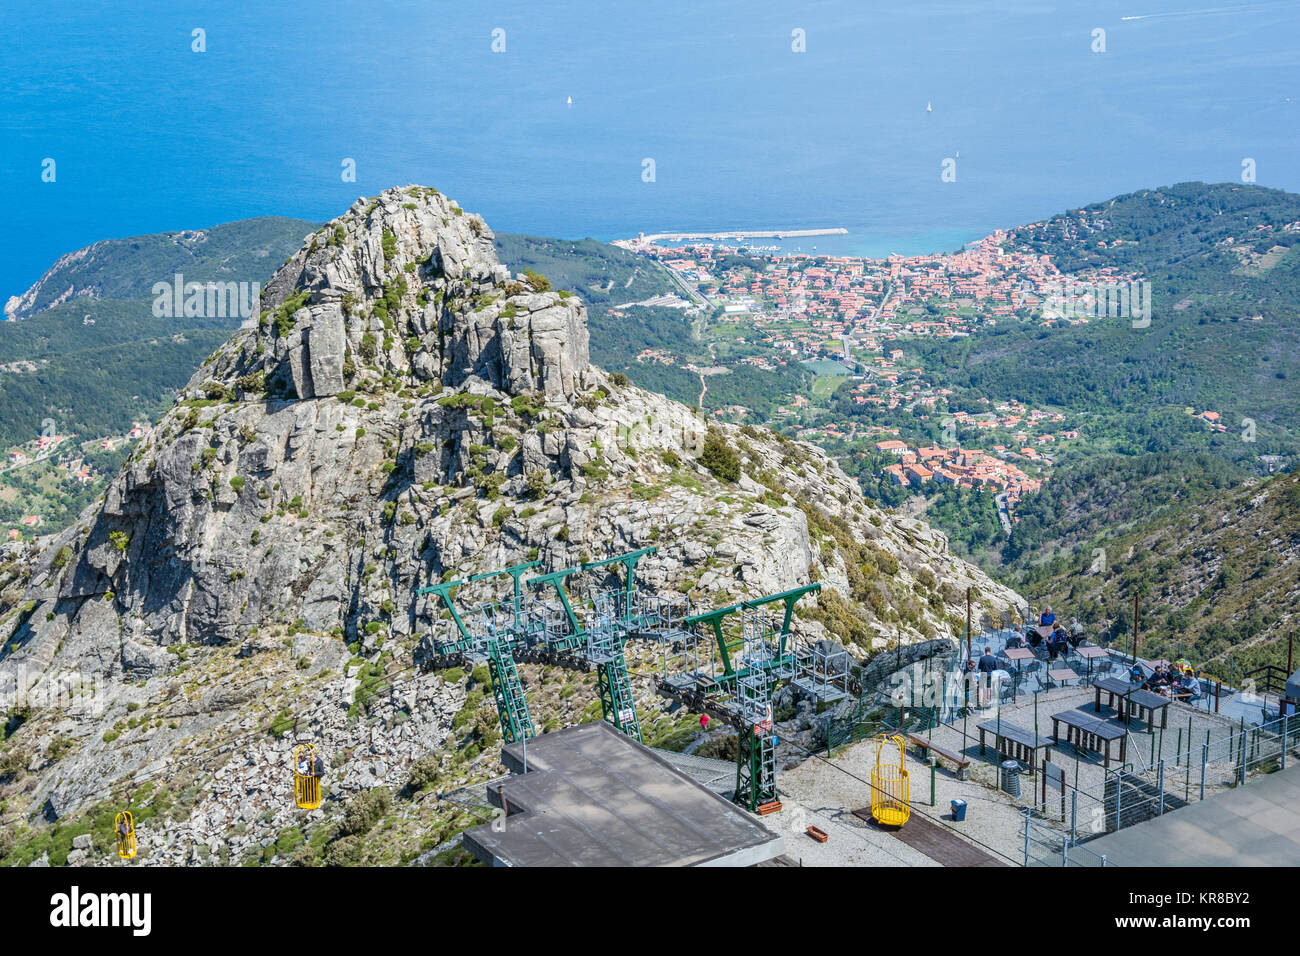 Cableway to the top of Capanne mountain in Elba Island. Stock Photo